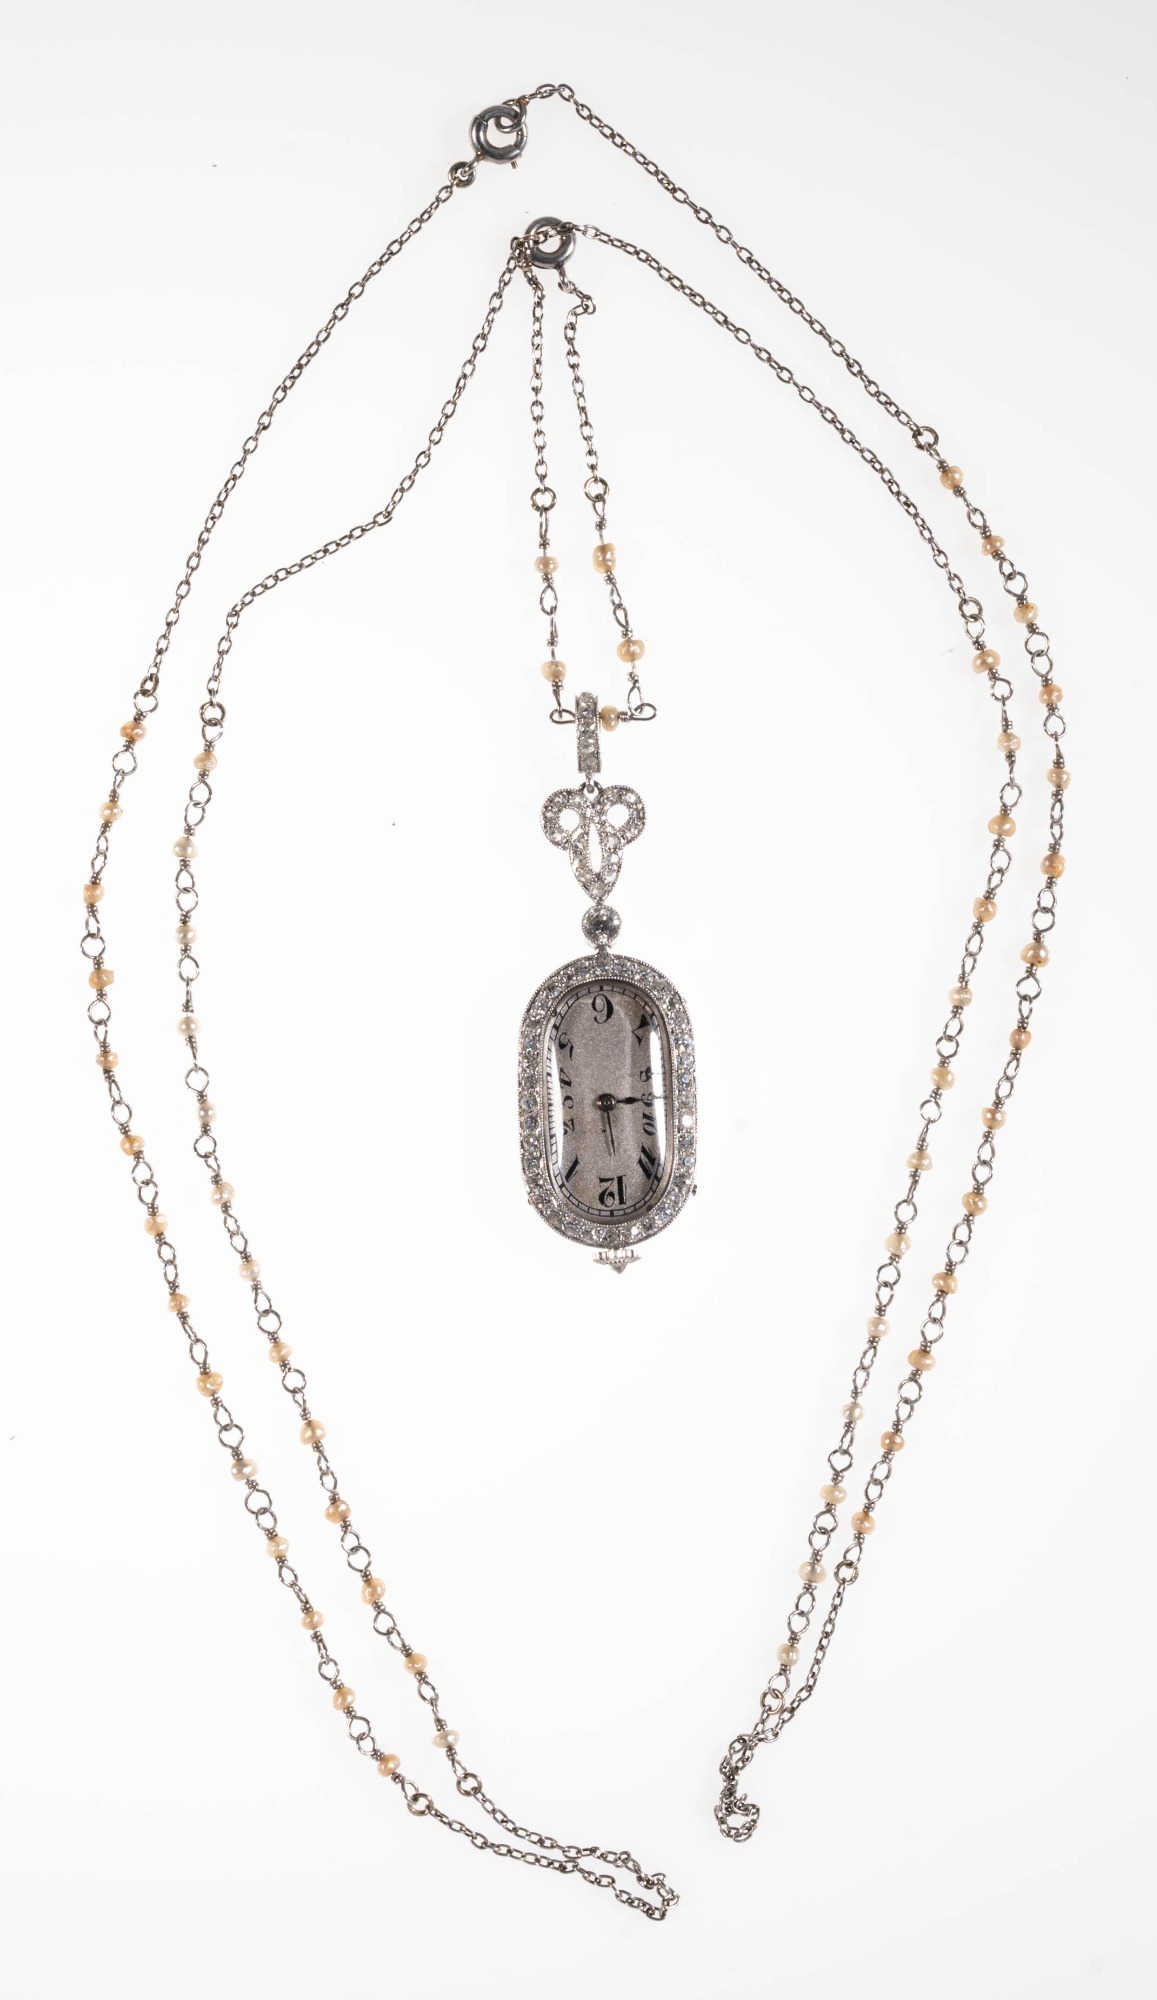 ART DECO PLATINUM AND DIAMOND PENDANT WATCH WITH PLATINUM AND SEED PEARL CHAIN - 2